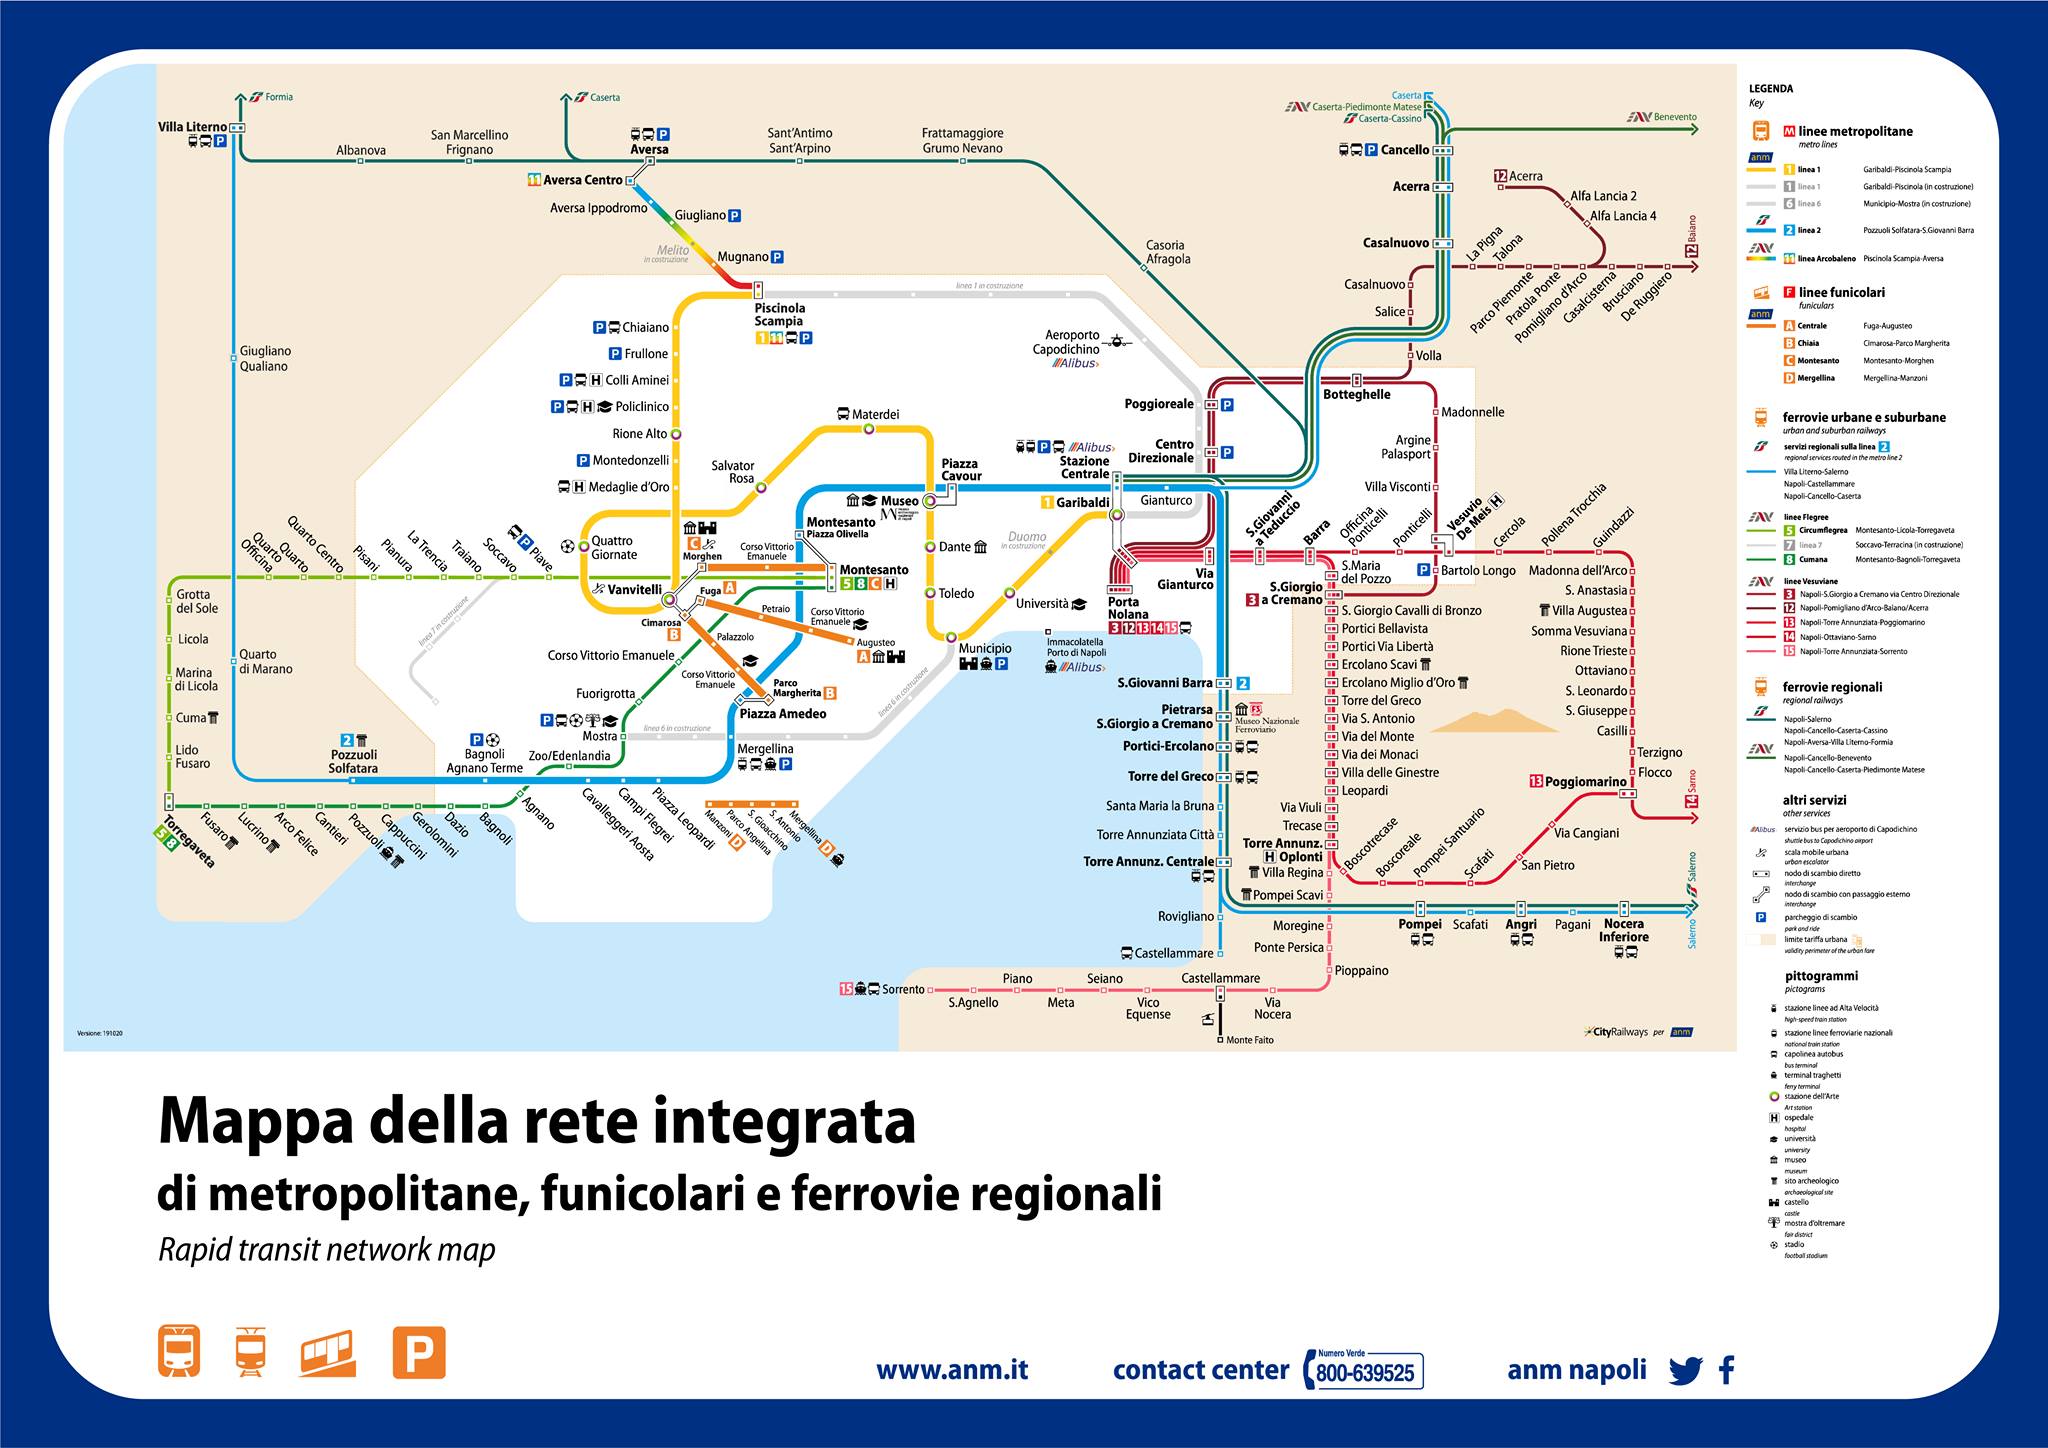 map of the integrated network of #metropolitane, funiculars and regional railways